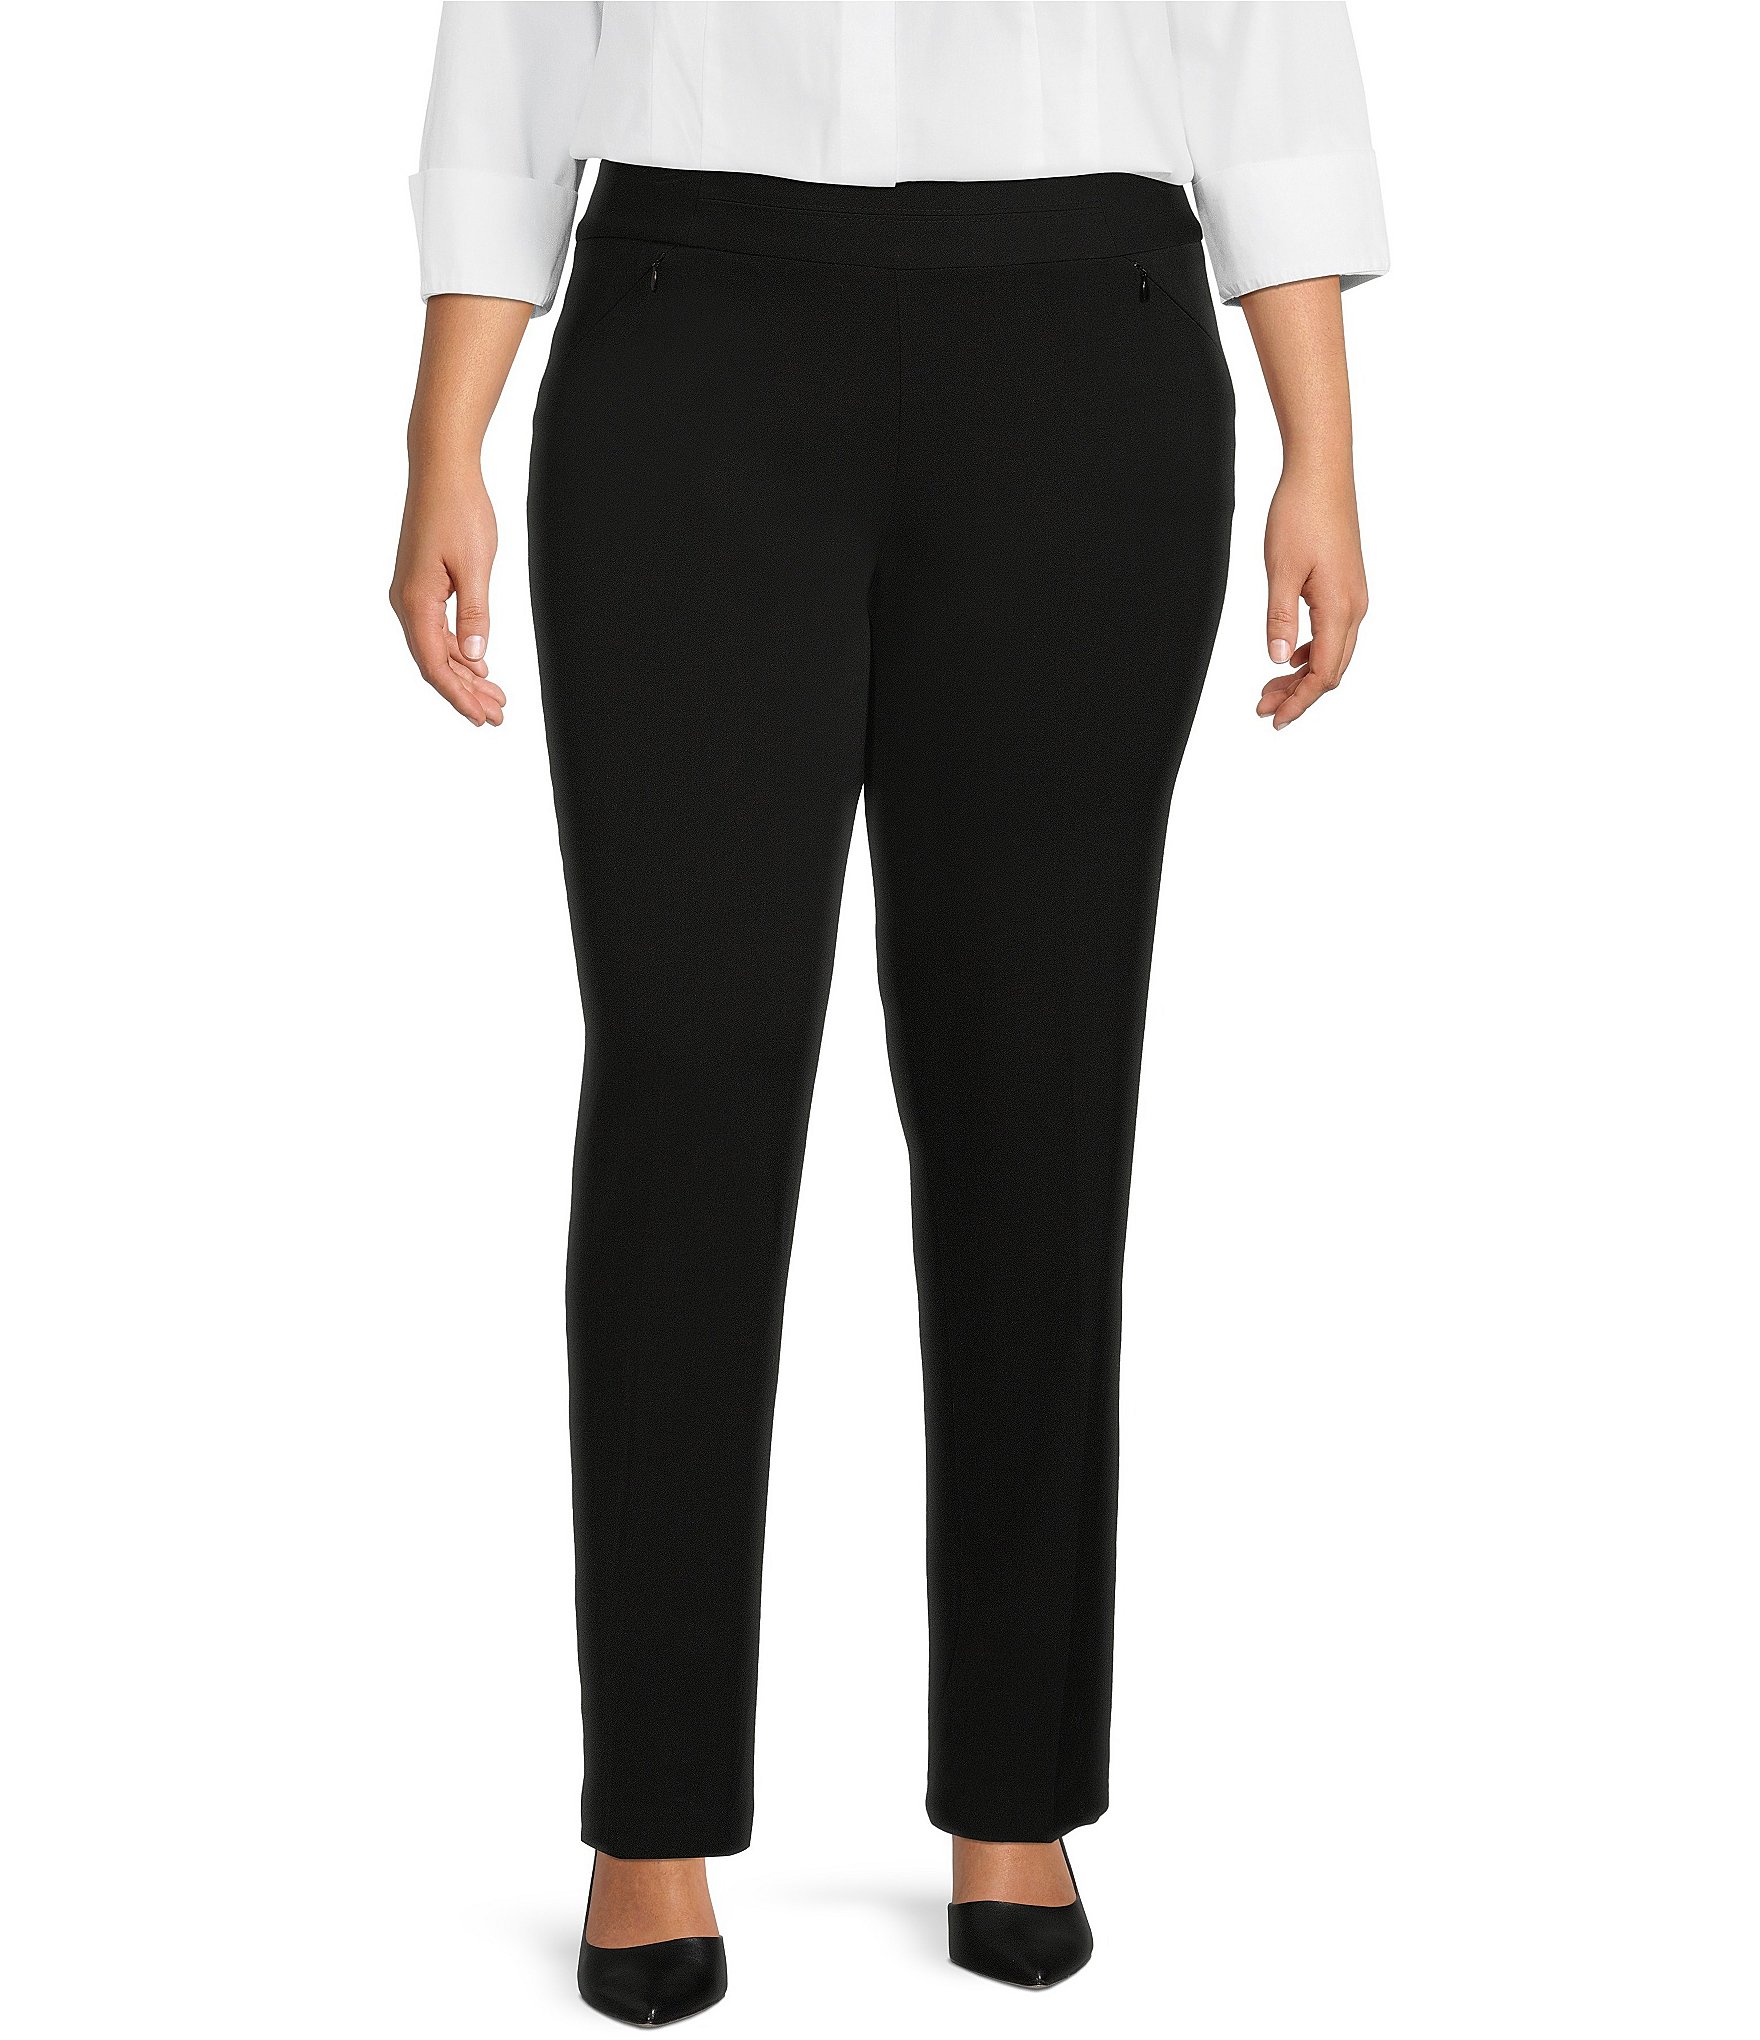 https://dimg.dillards.com/is/image/DillardsZoom/zoom/investments-plus-size-the-park-ave-fit-pull-on-straight-leg-pant-with-pockets/00000001_zi_black05389456.jpg